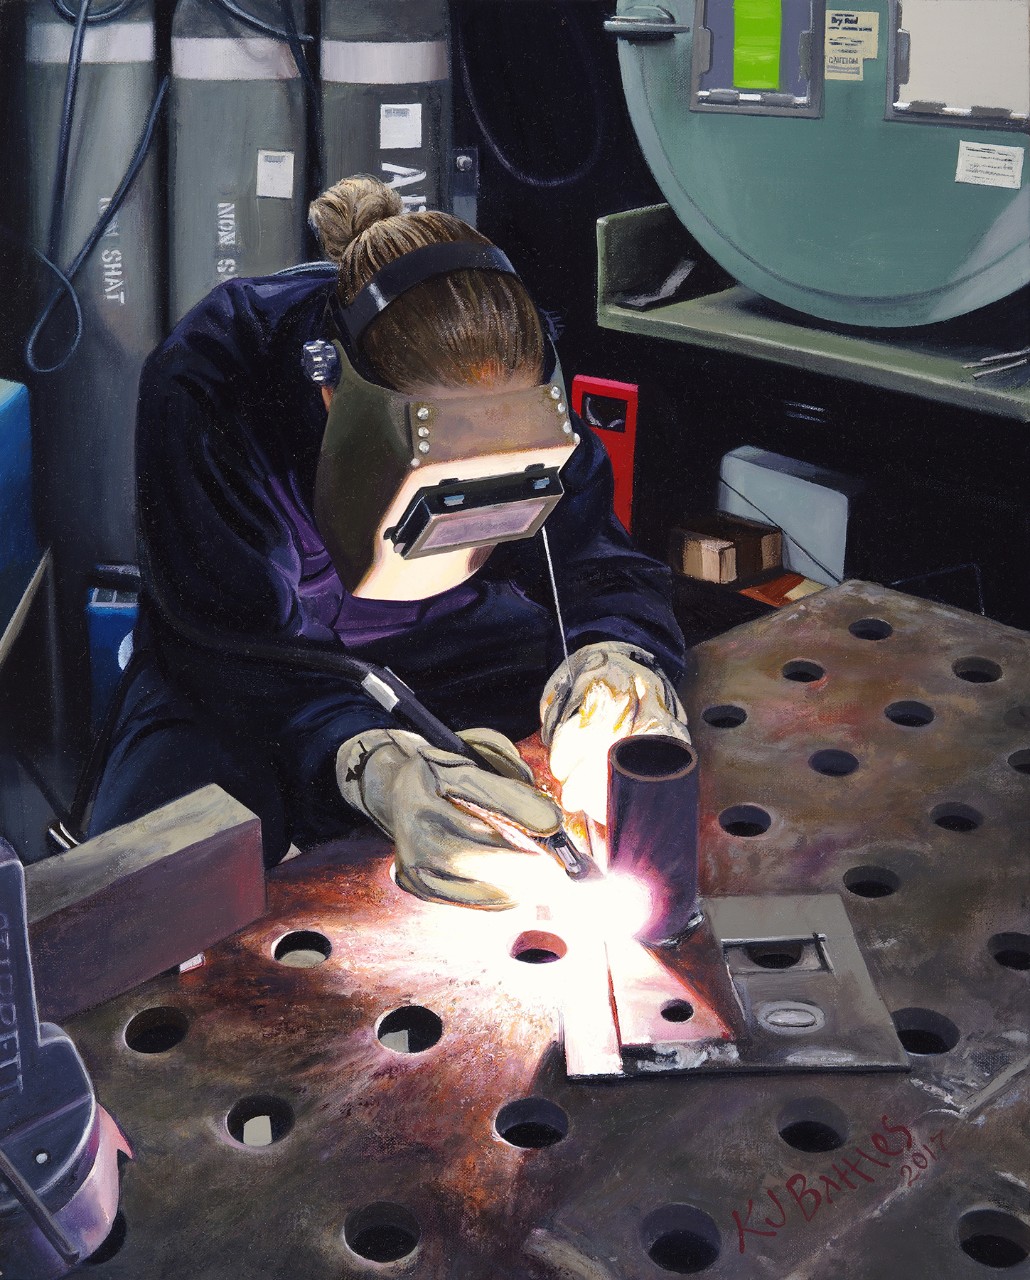 A Woman in a welder’s mask is working on a piece of pipe